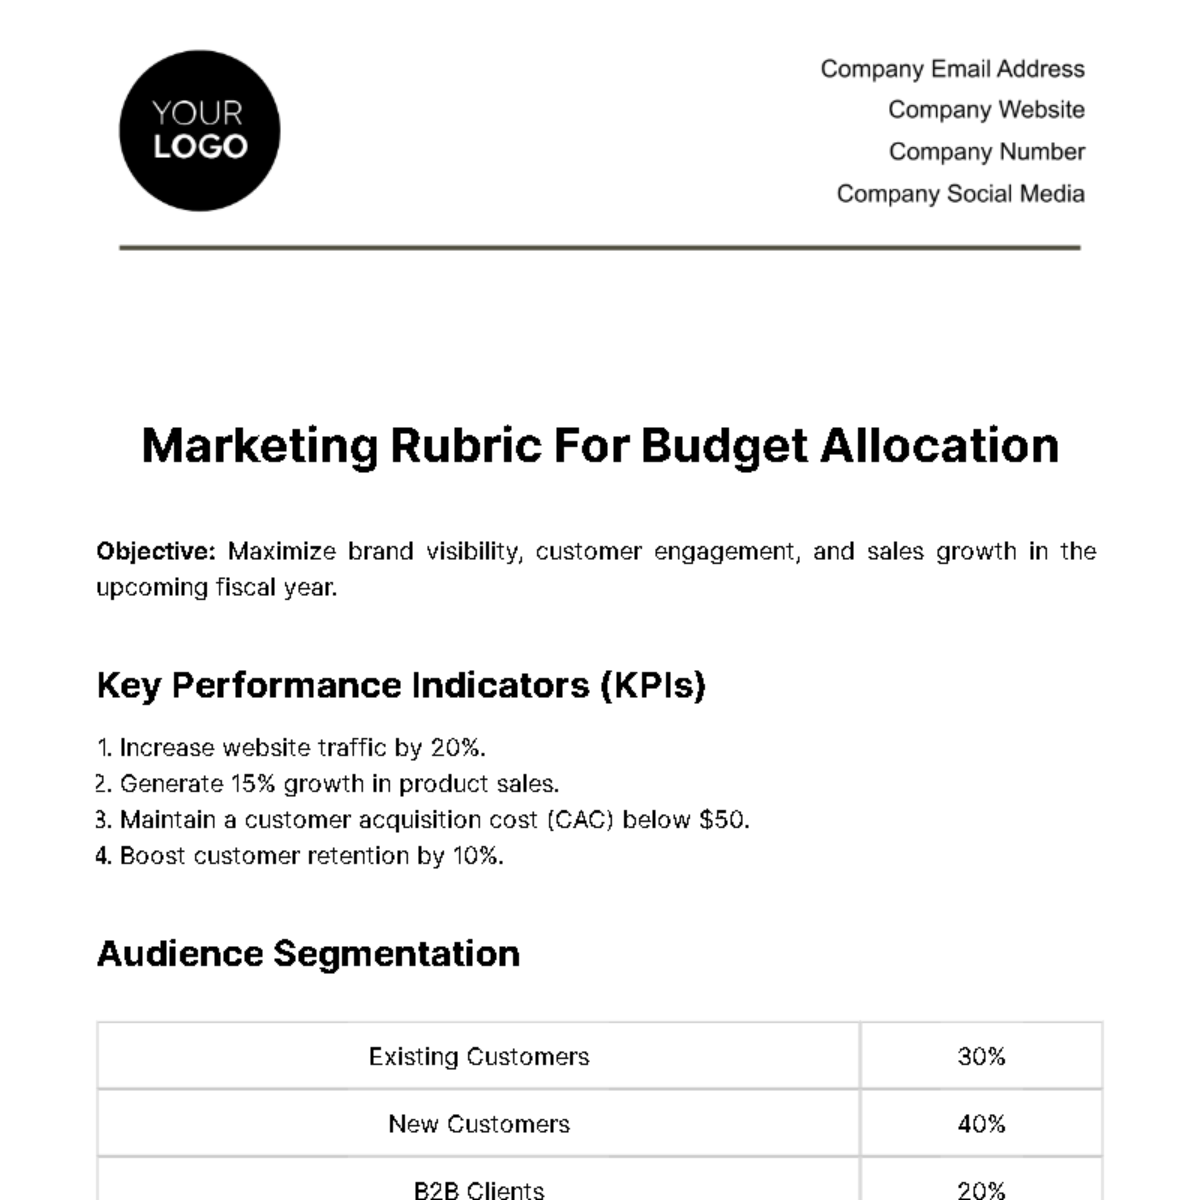 Free Marketing Rubric for Budget Allocation Template